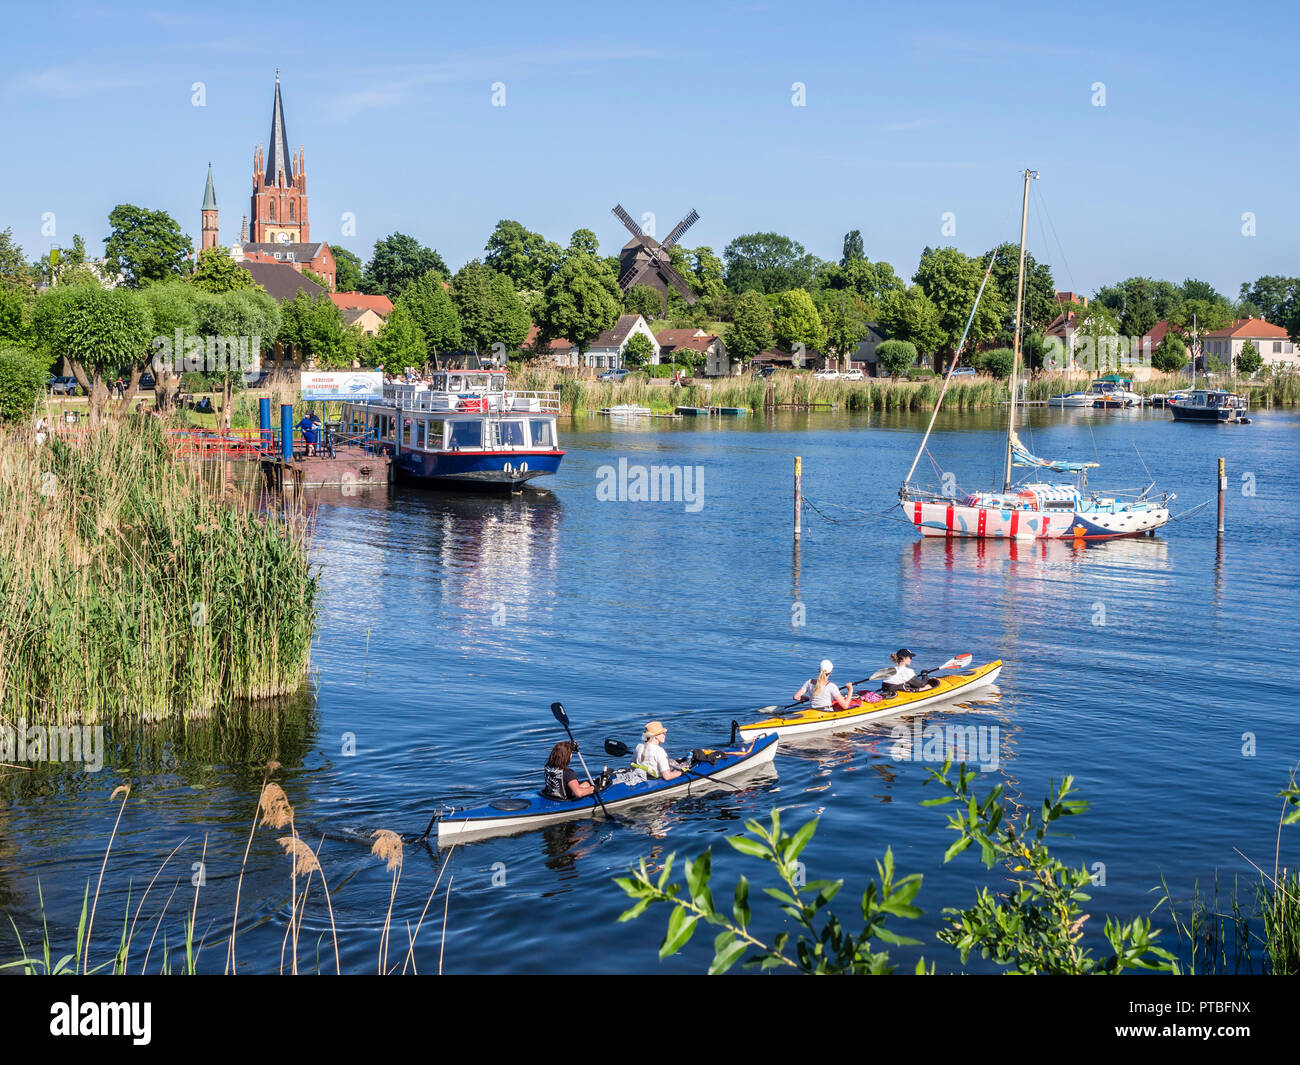 Havel cycle route, village Werder, peninsula with church an old mill, old city center at river Havel, Brandenburg, Germany. Stock Photo